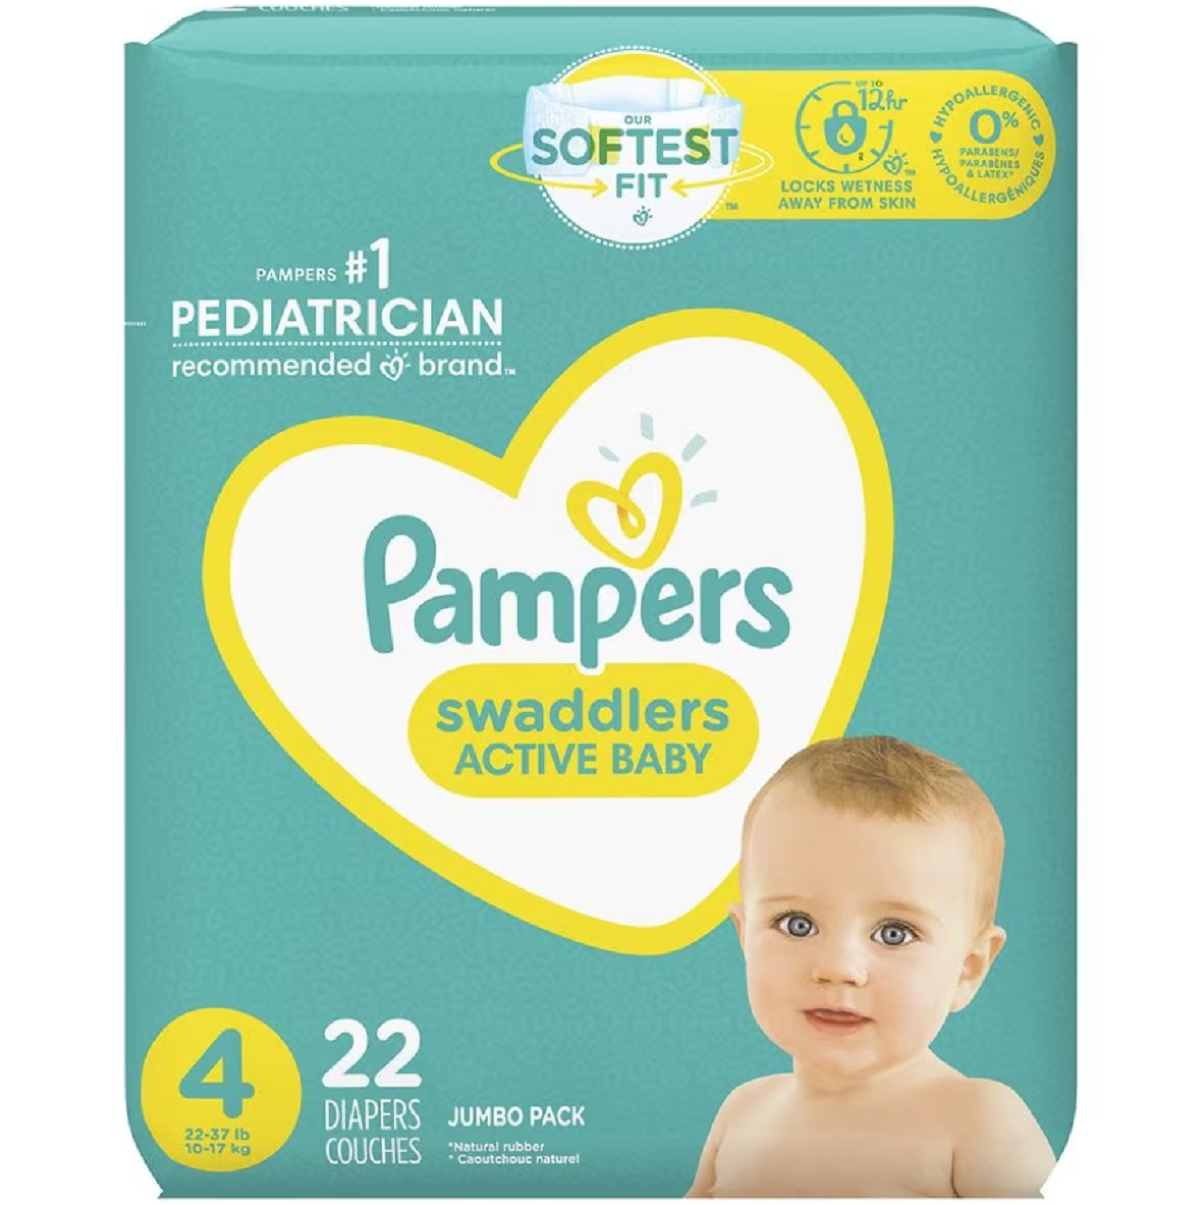 $3 Off (2) Pampers Diapers Printable Coupon